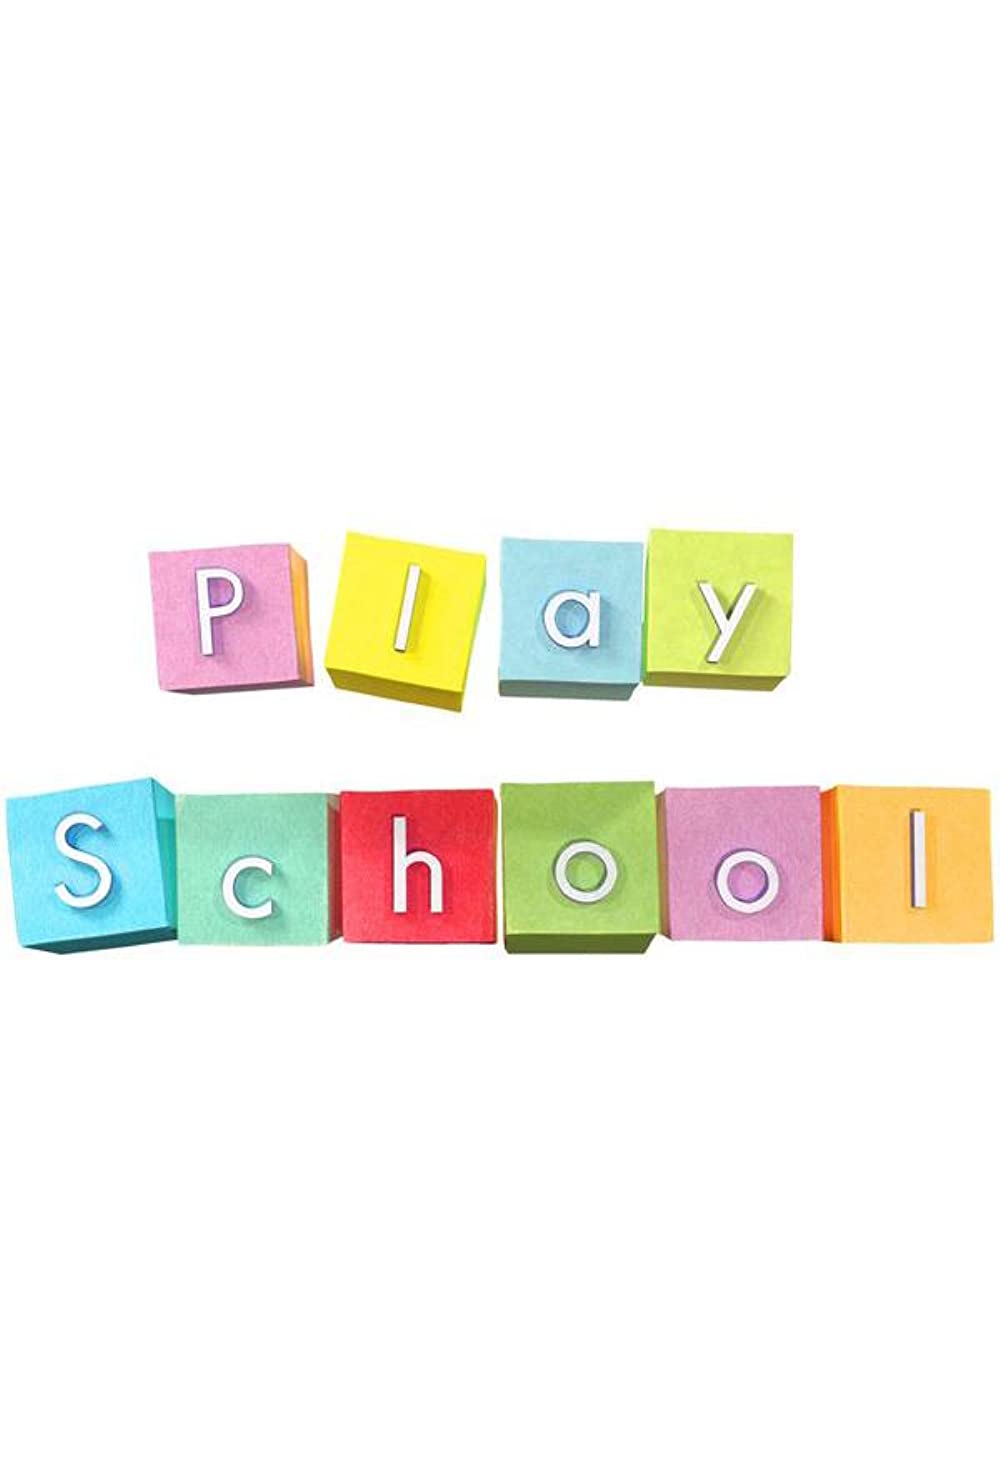 Play School Houses - Bathroom and Moving House